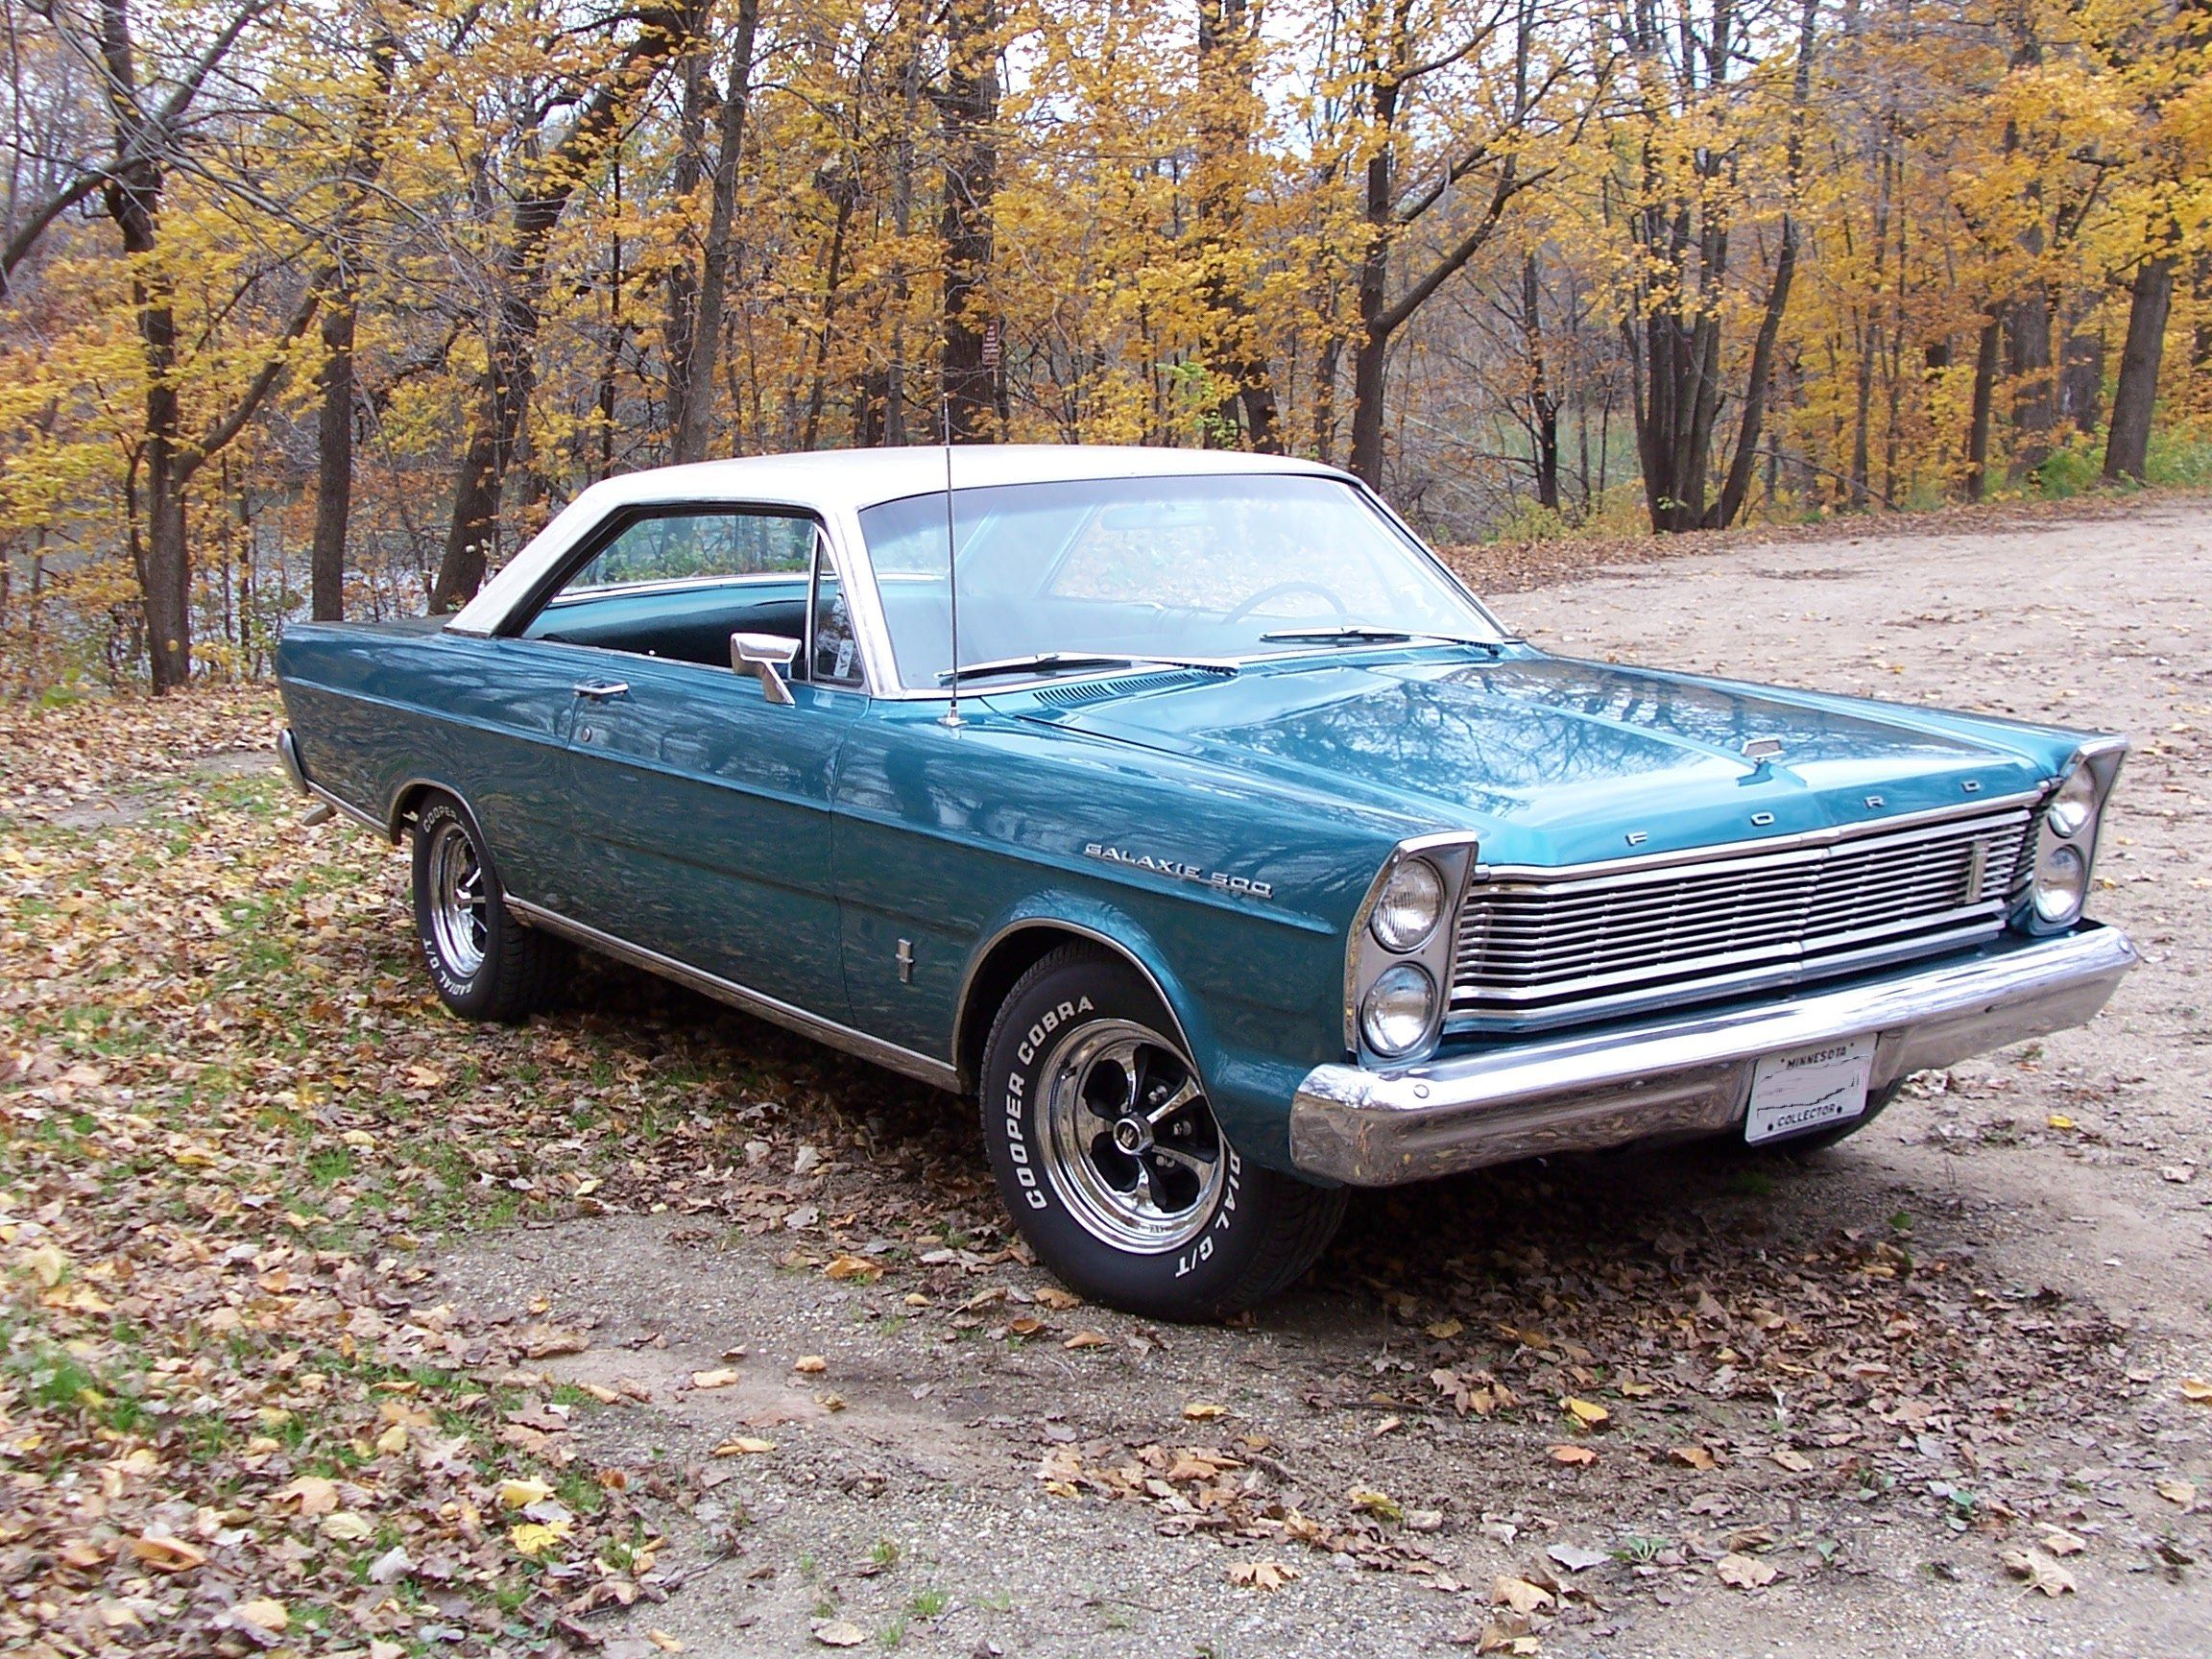 1965 Ford Galaxie parked at a park